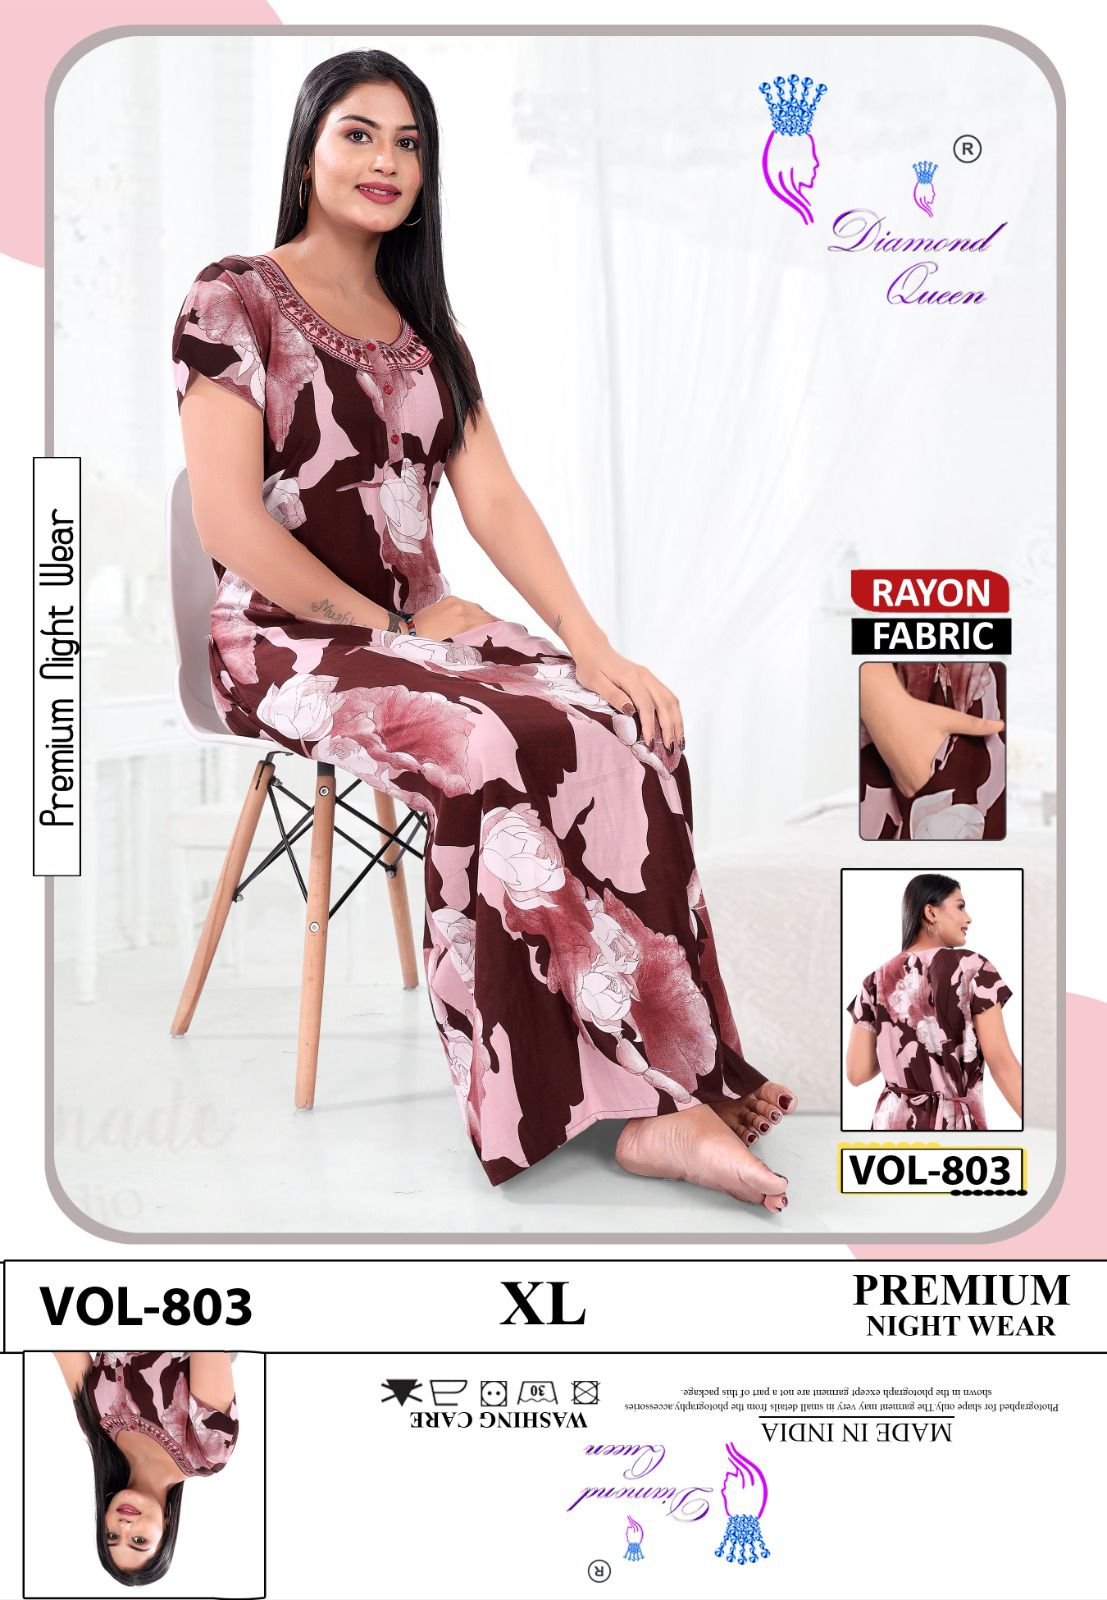 801-803 Diamond Queen Rayon Night Gowns